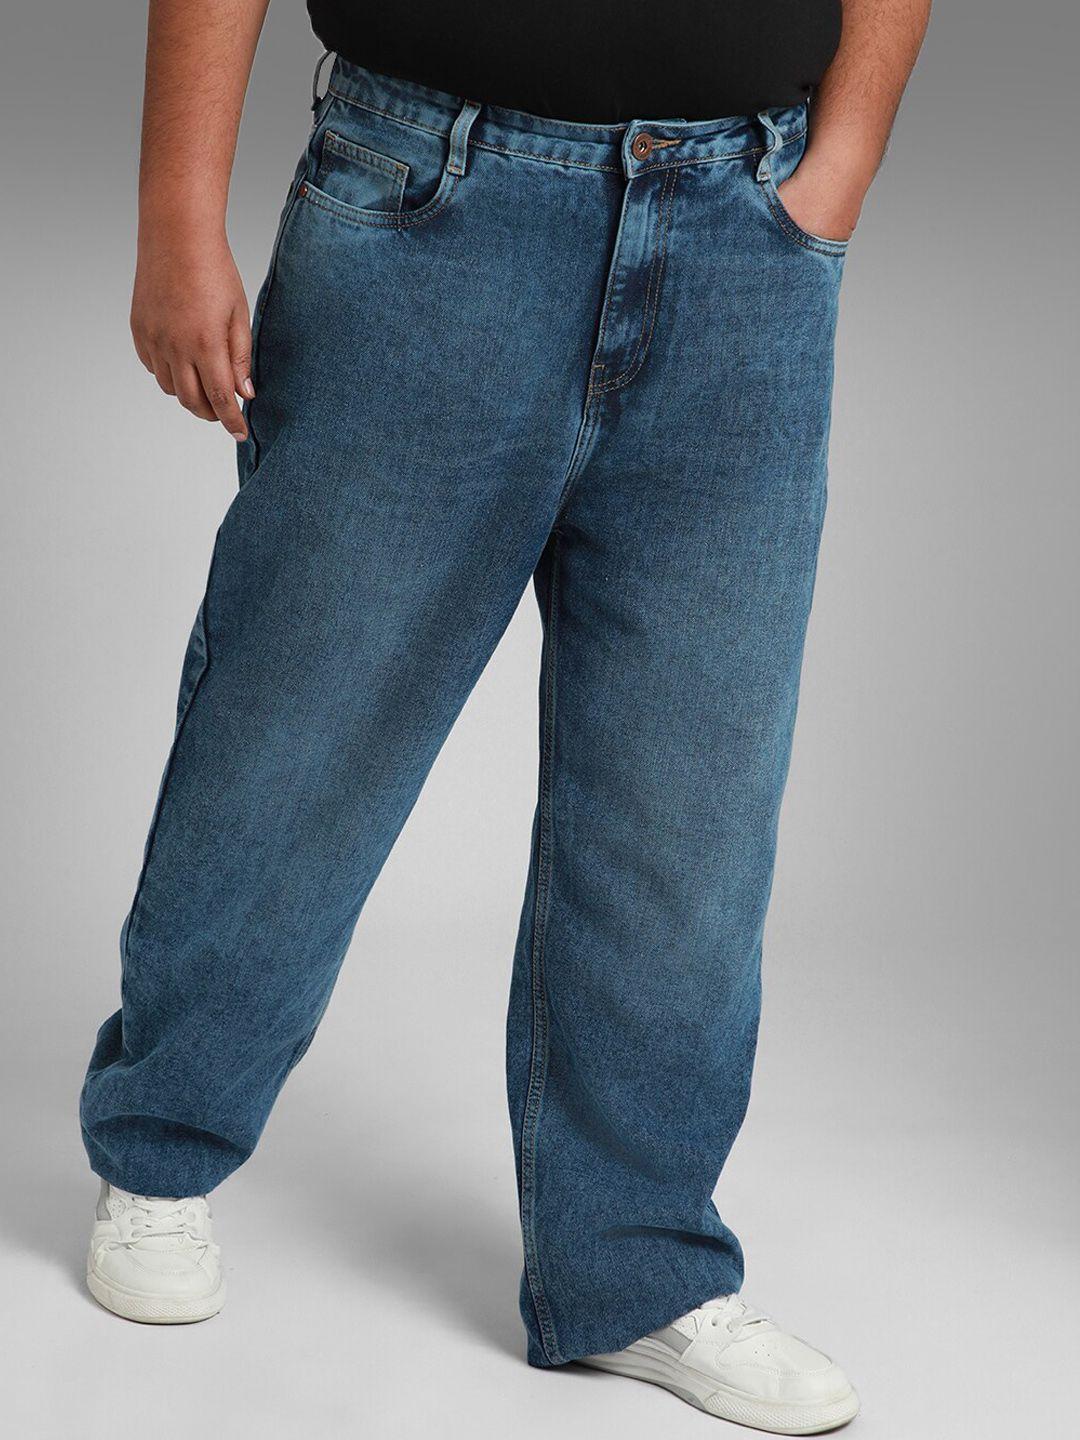 freeform by high star men plus size straight fit light fade jeans